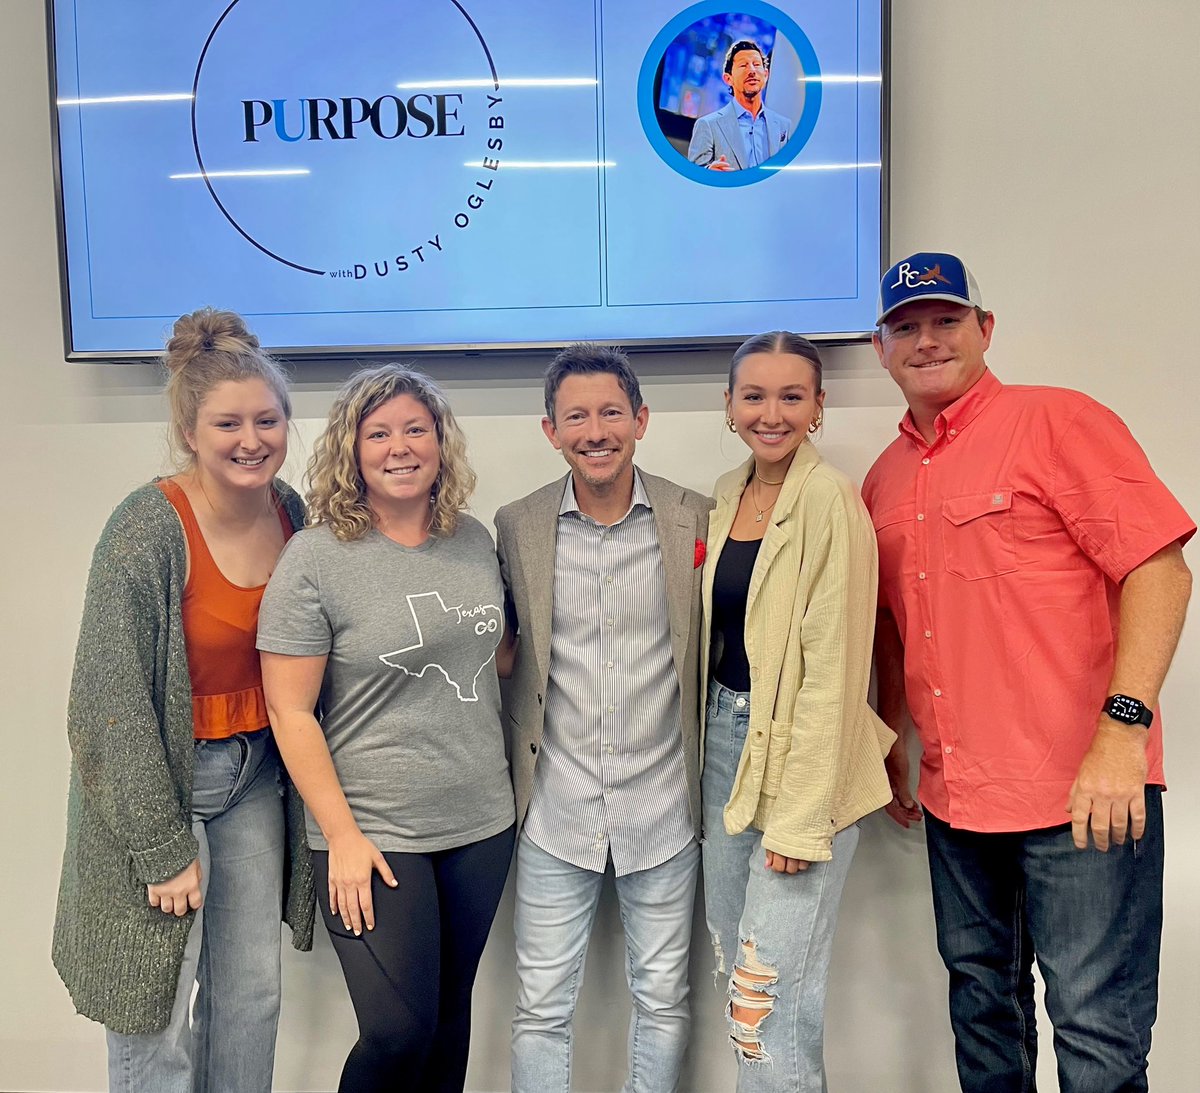 Beyond grateful for these amazing people, and this amazing opportunity to learn from the best!! Thanks Eric Janszen for the invite and thanks Dusty Oglesby for the great inspiration!!! #kellerwilliams #elliscounty